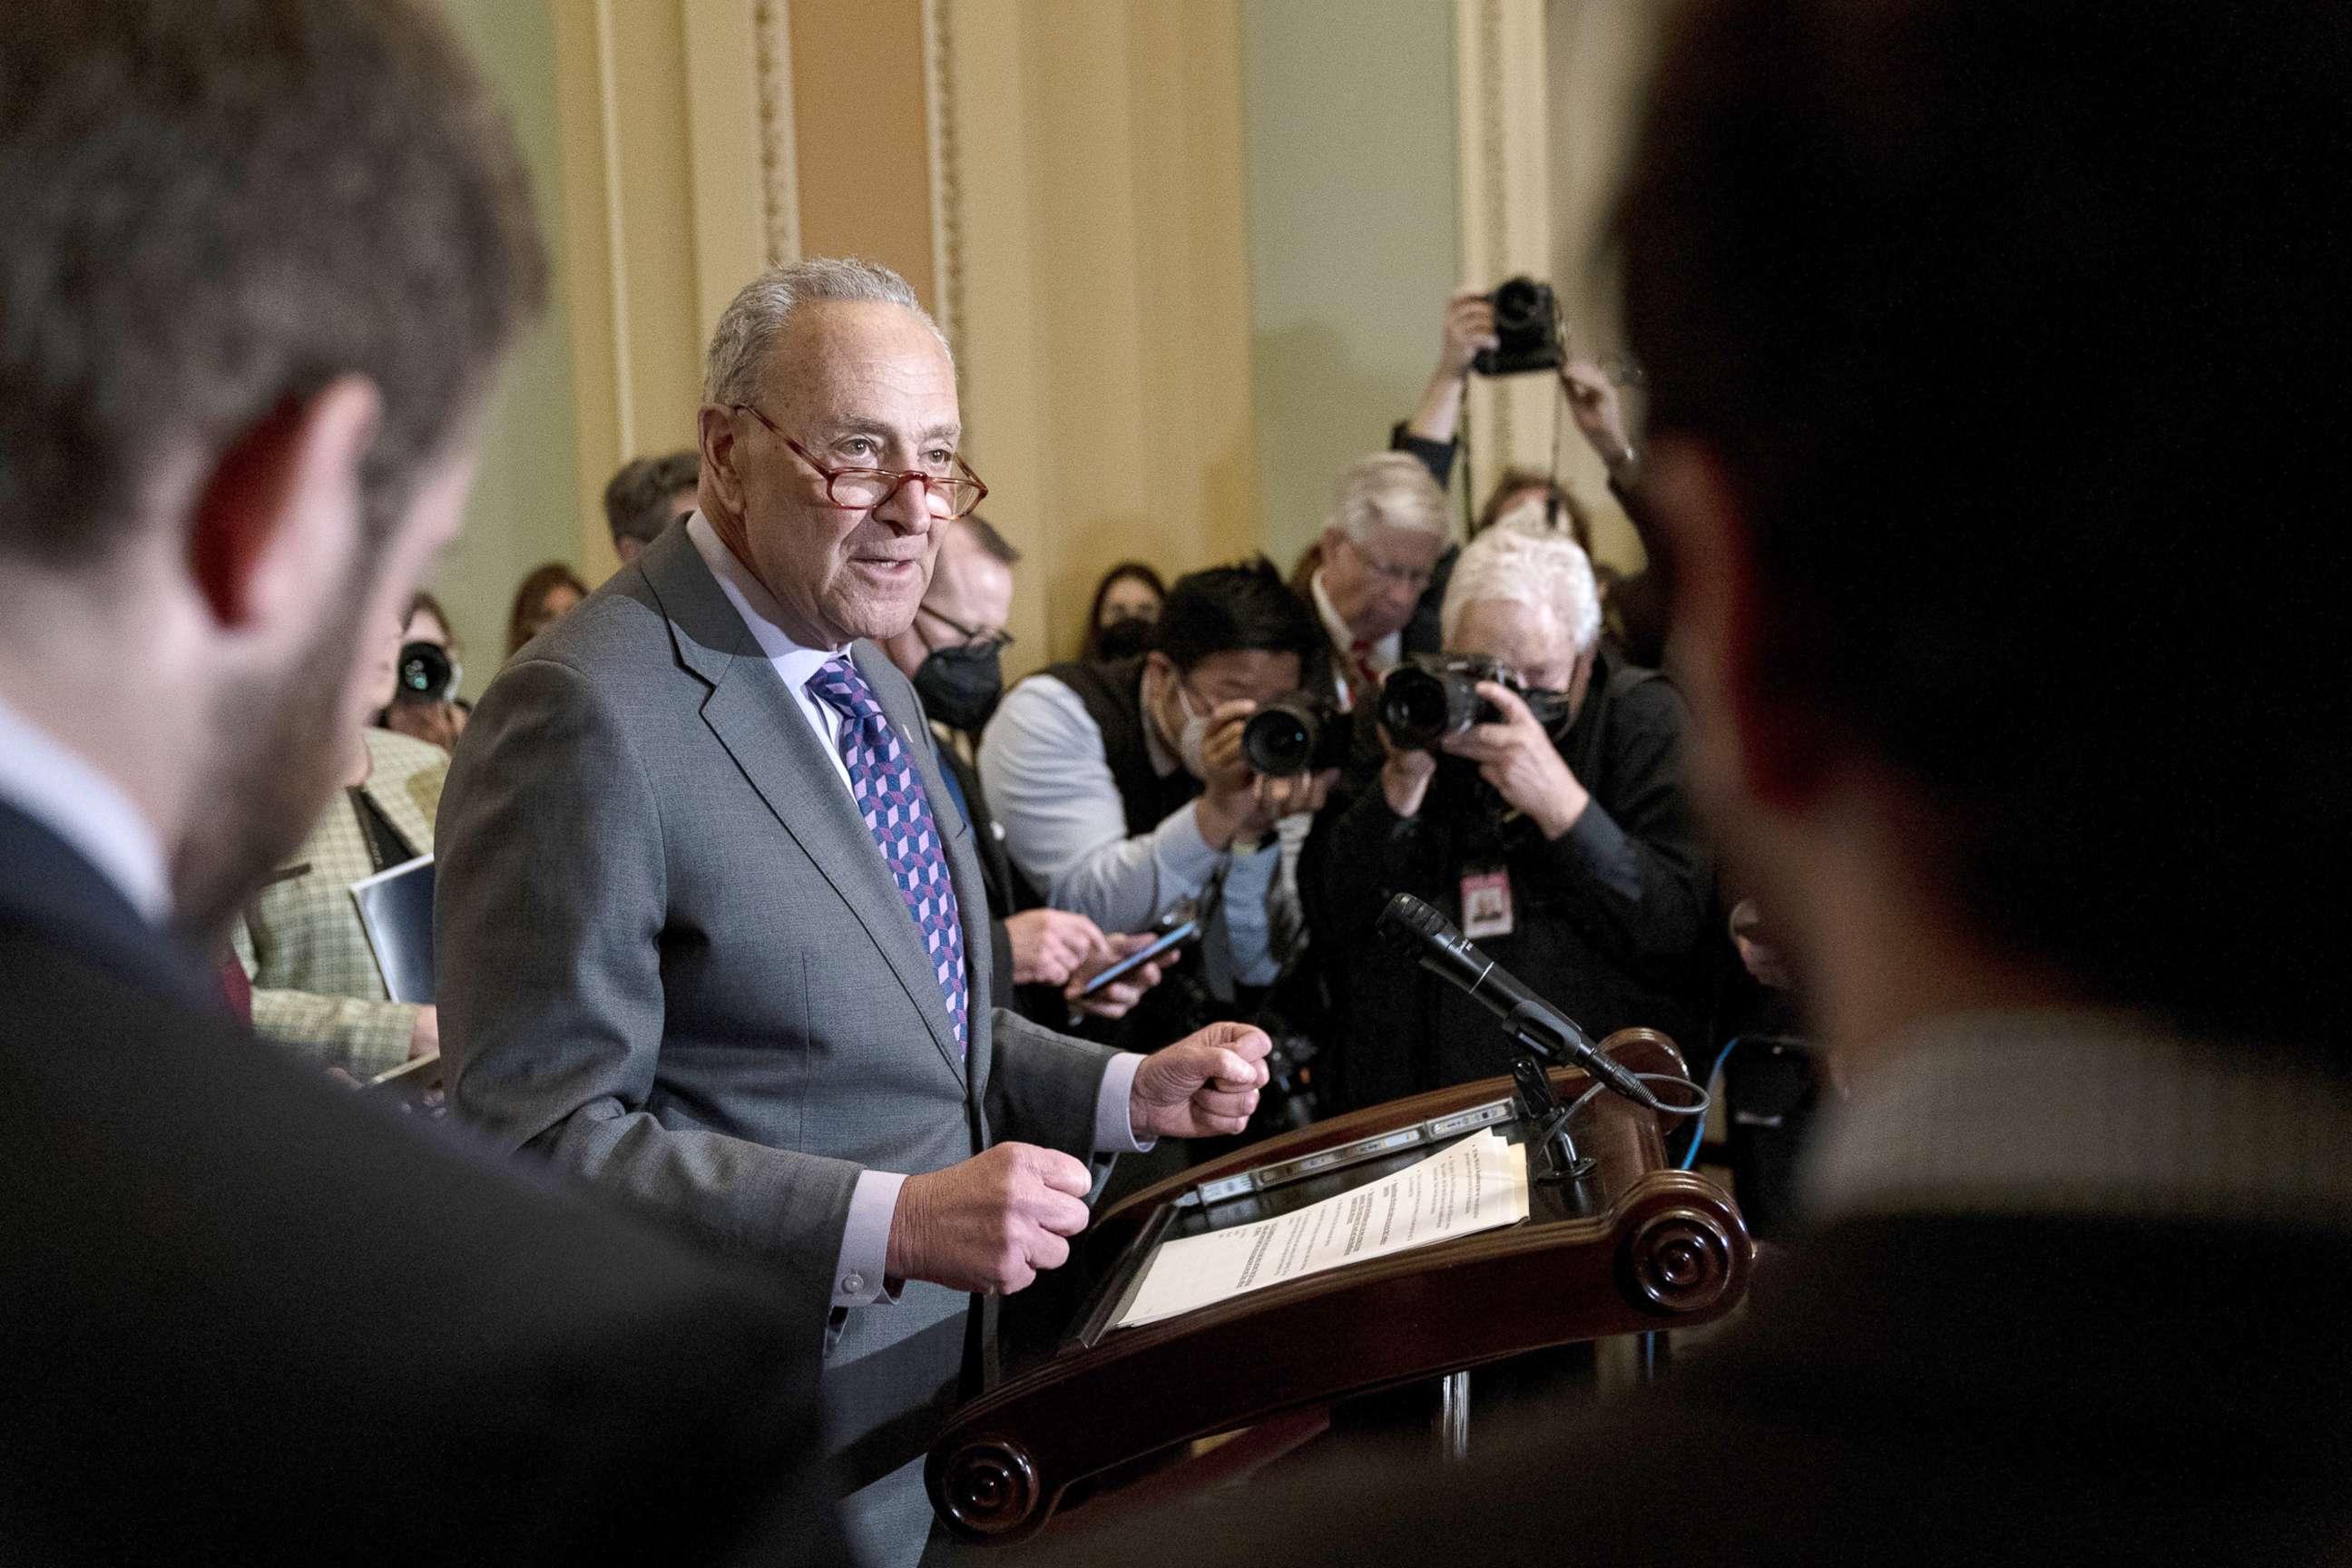 PHOTO: Senate Majority Leader Chuck Schumer speaks during a news conference following the weekly Democratic caucus luncheon at the Capitol in Washington, May 10, 2022.